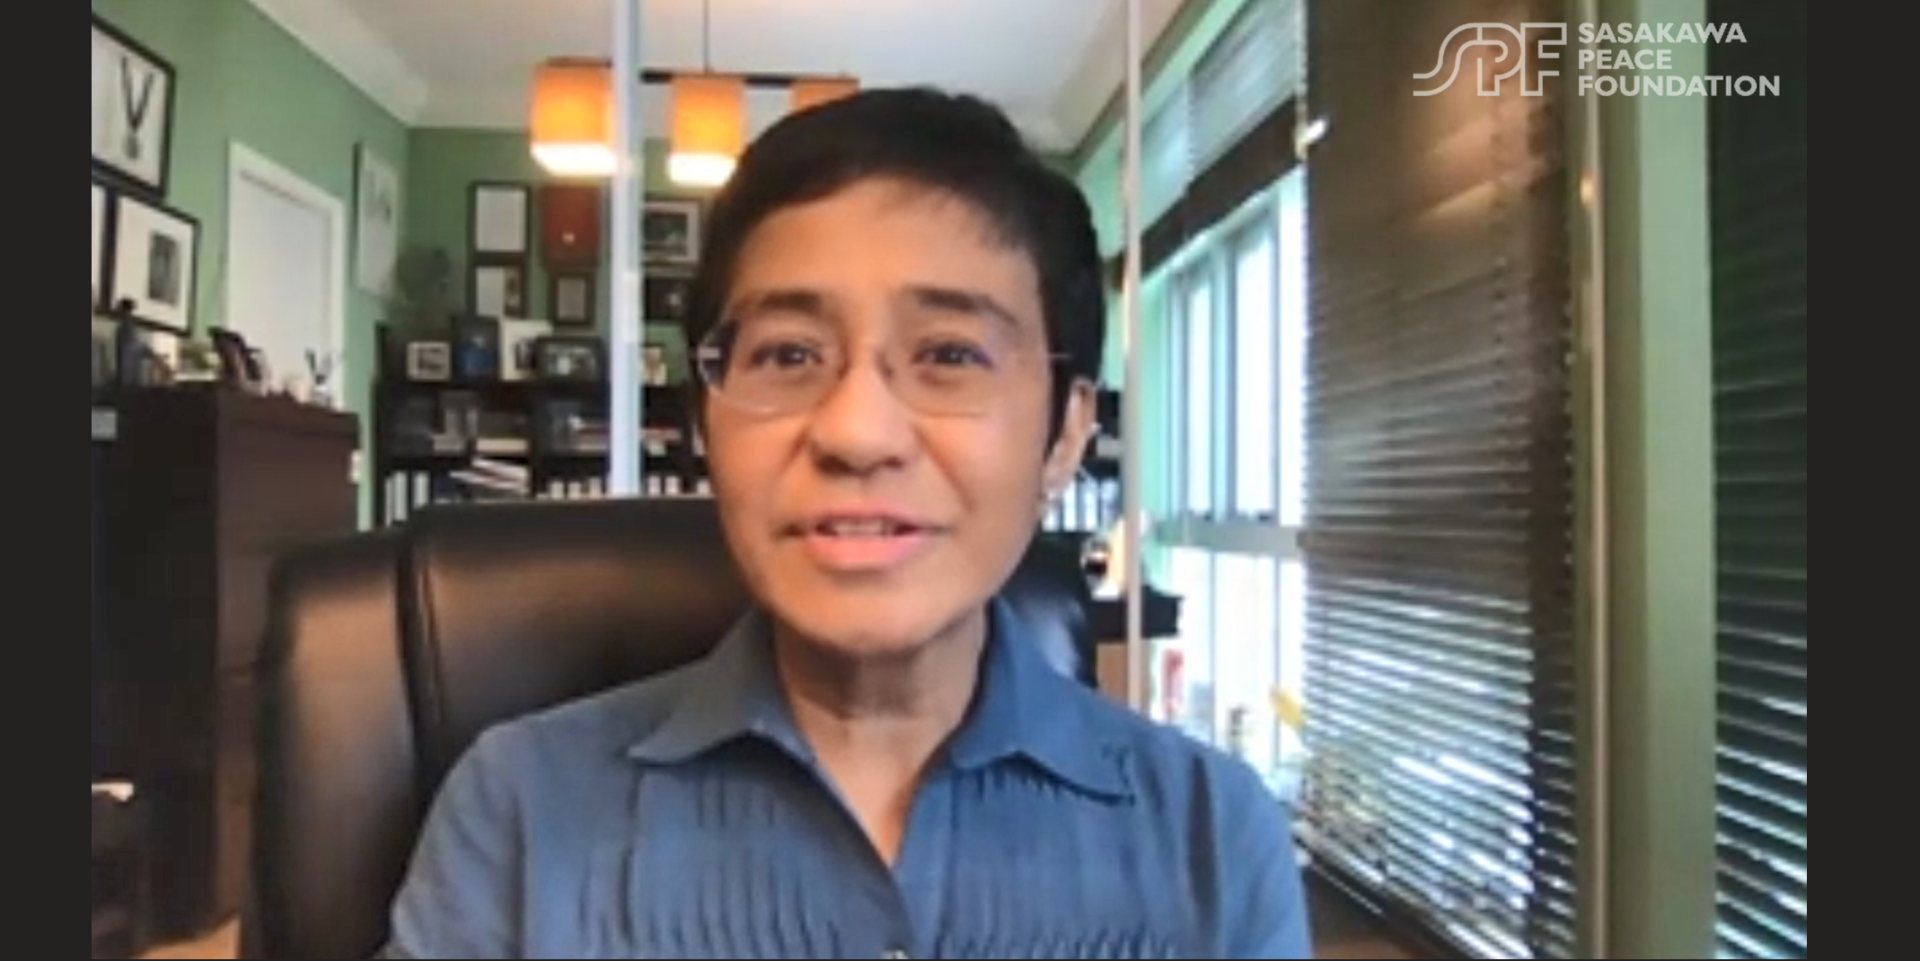 Ms. Maria Ressa (During an August 2020 online interview with SPF)